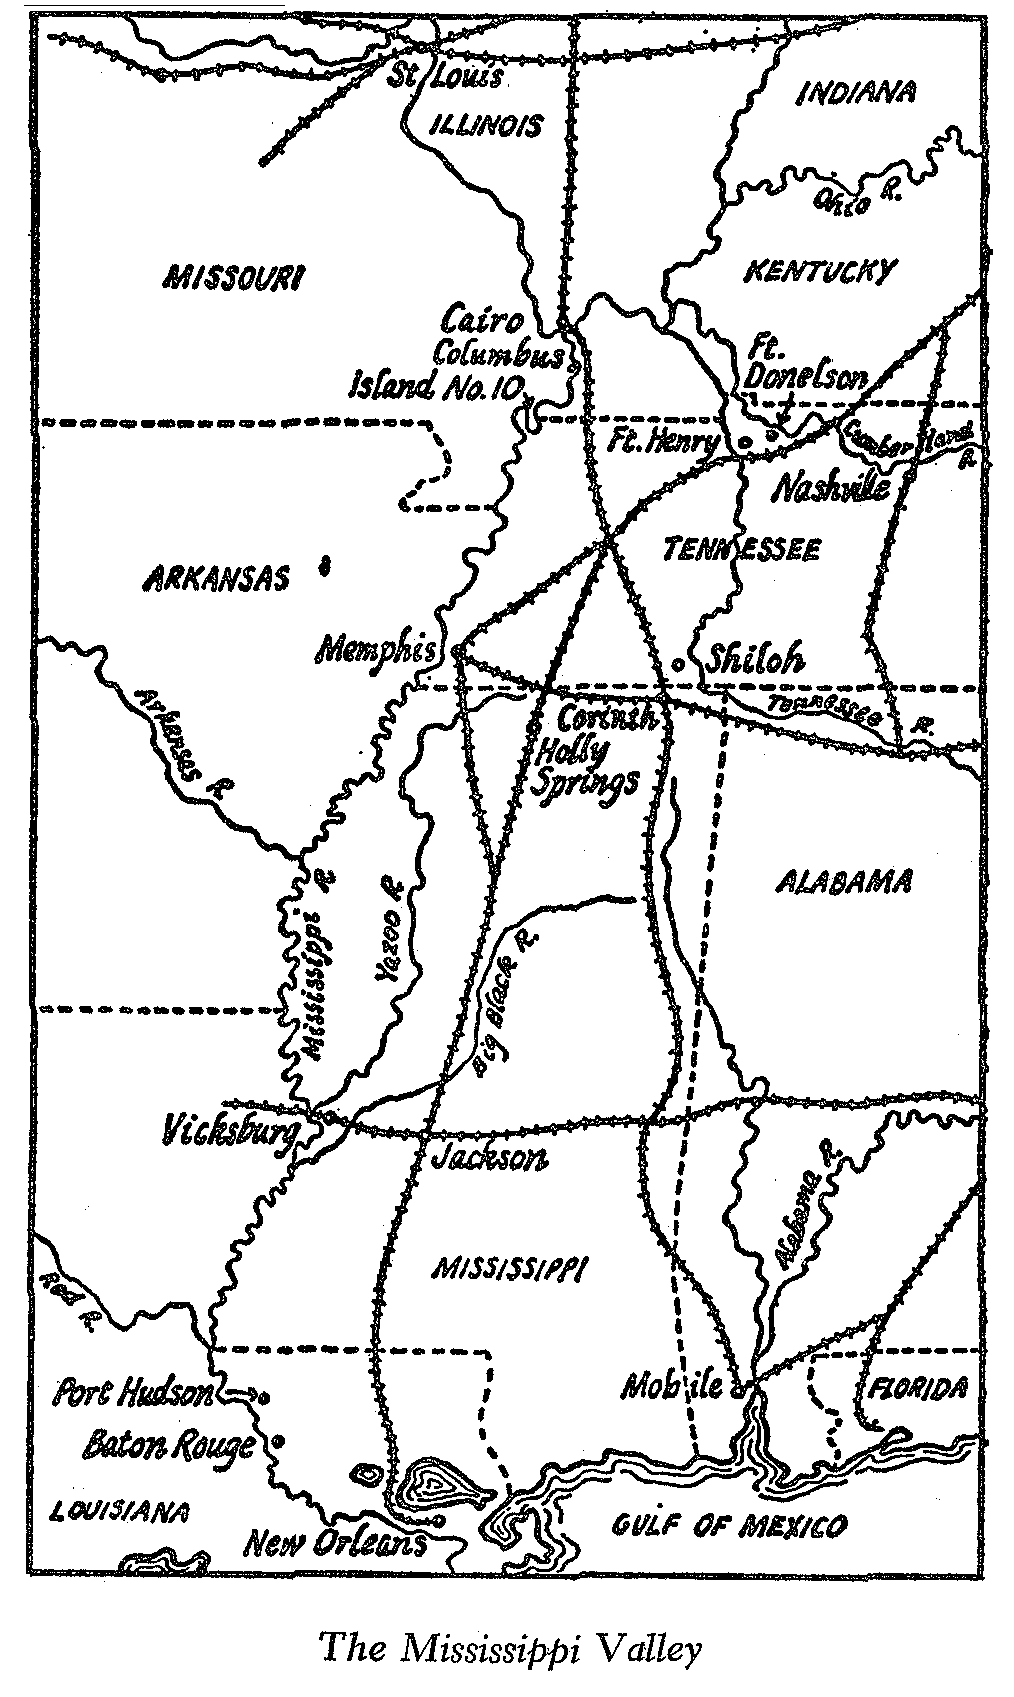 The Mississippi Valley